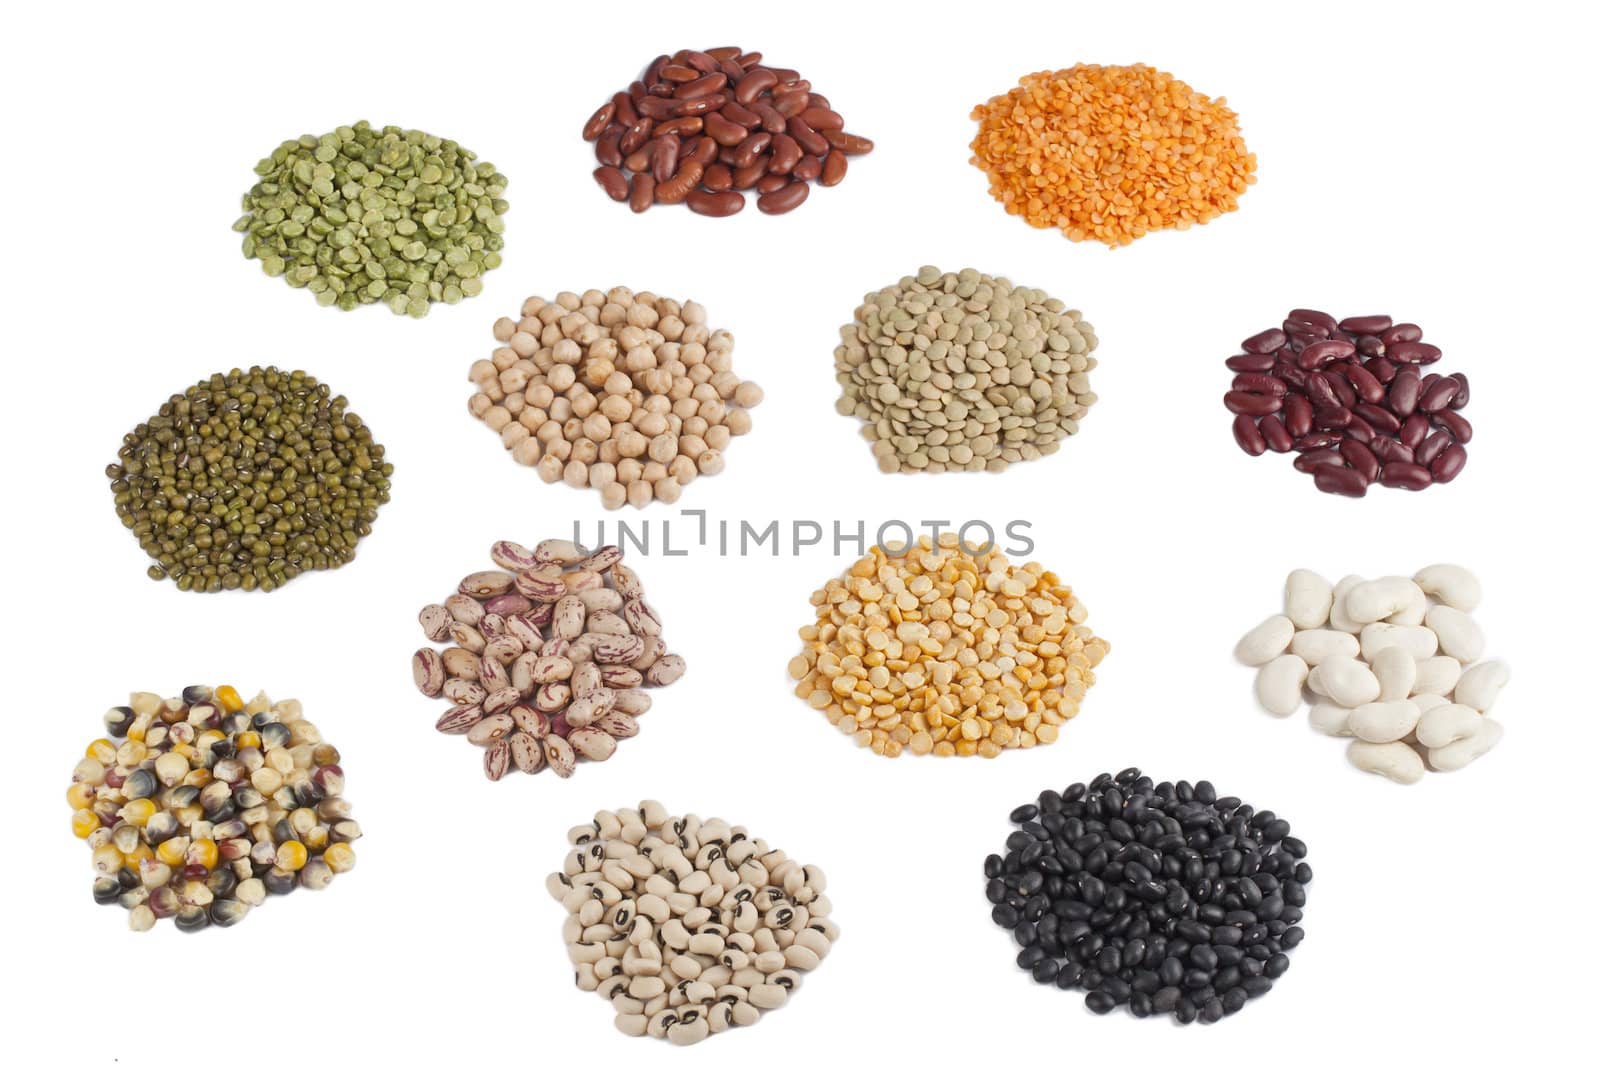 Variety of beans and pulses displayed on white background